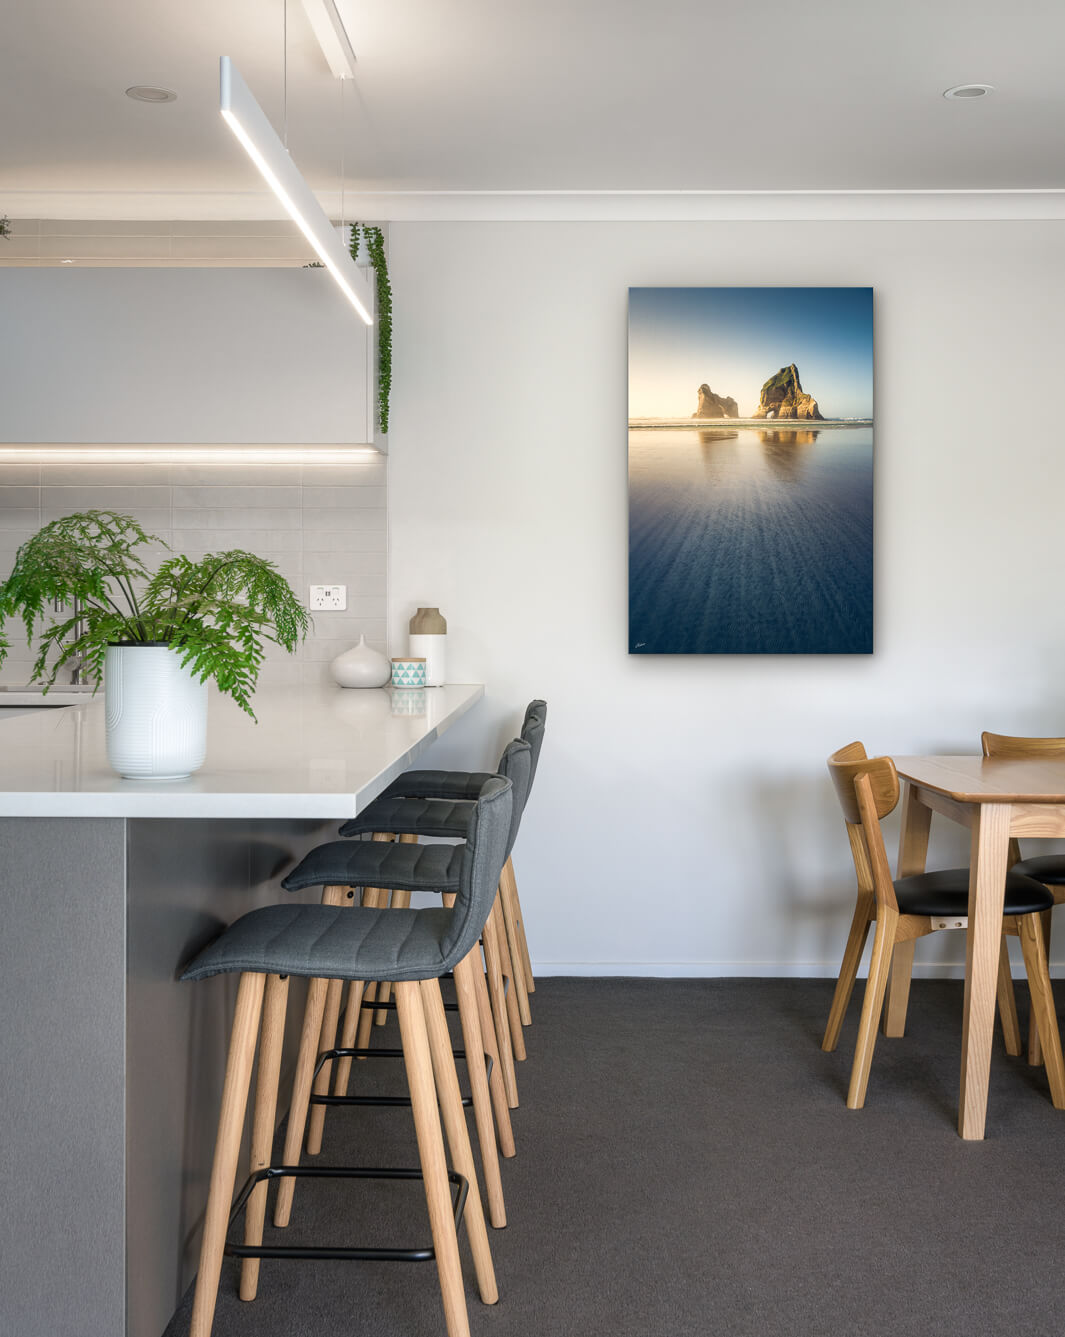 New Zealand landscape photo on canvas in modern kitchen with white bench, barstools, fern and dining setting